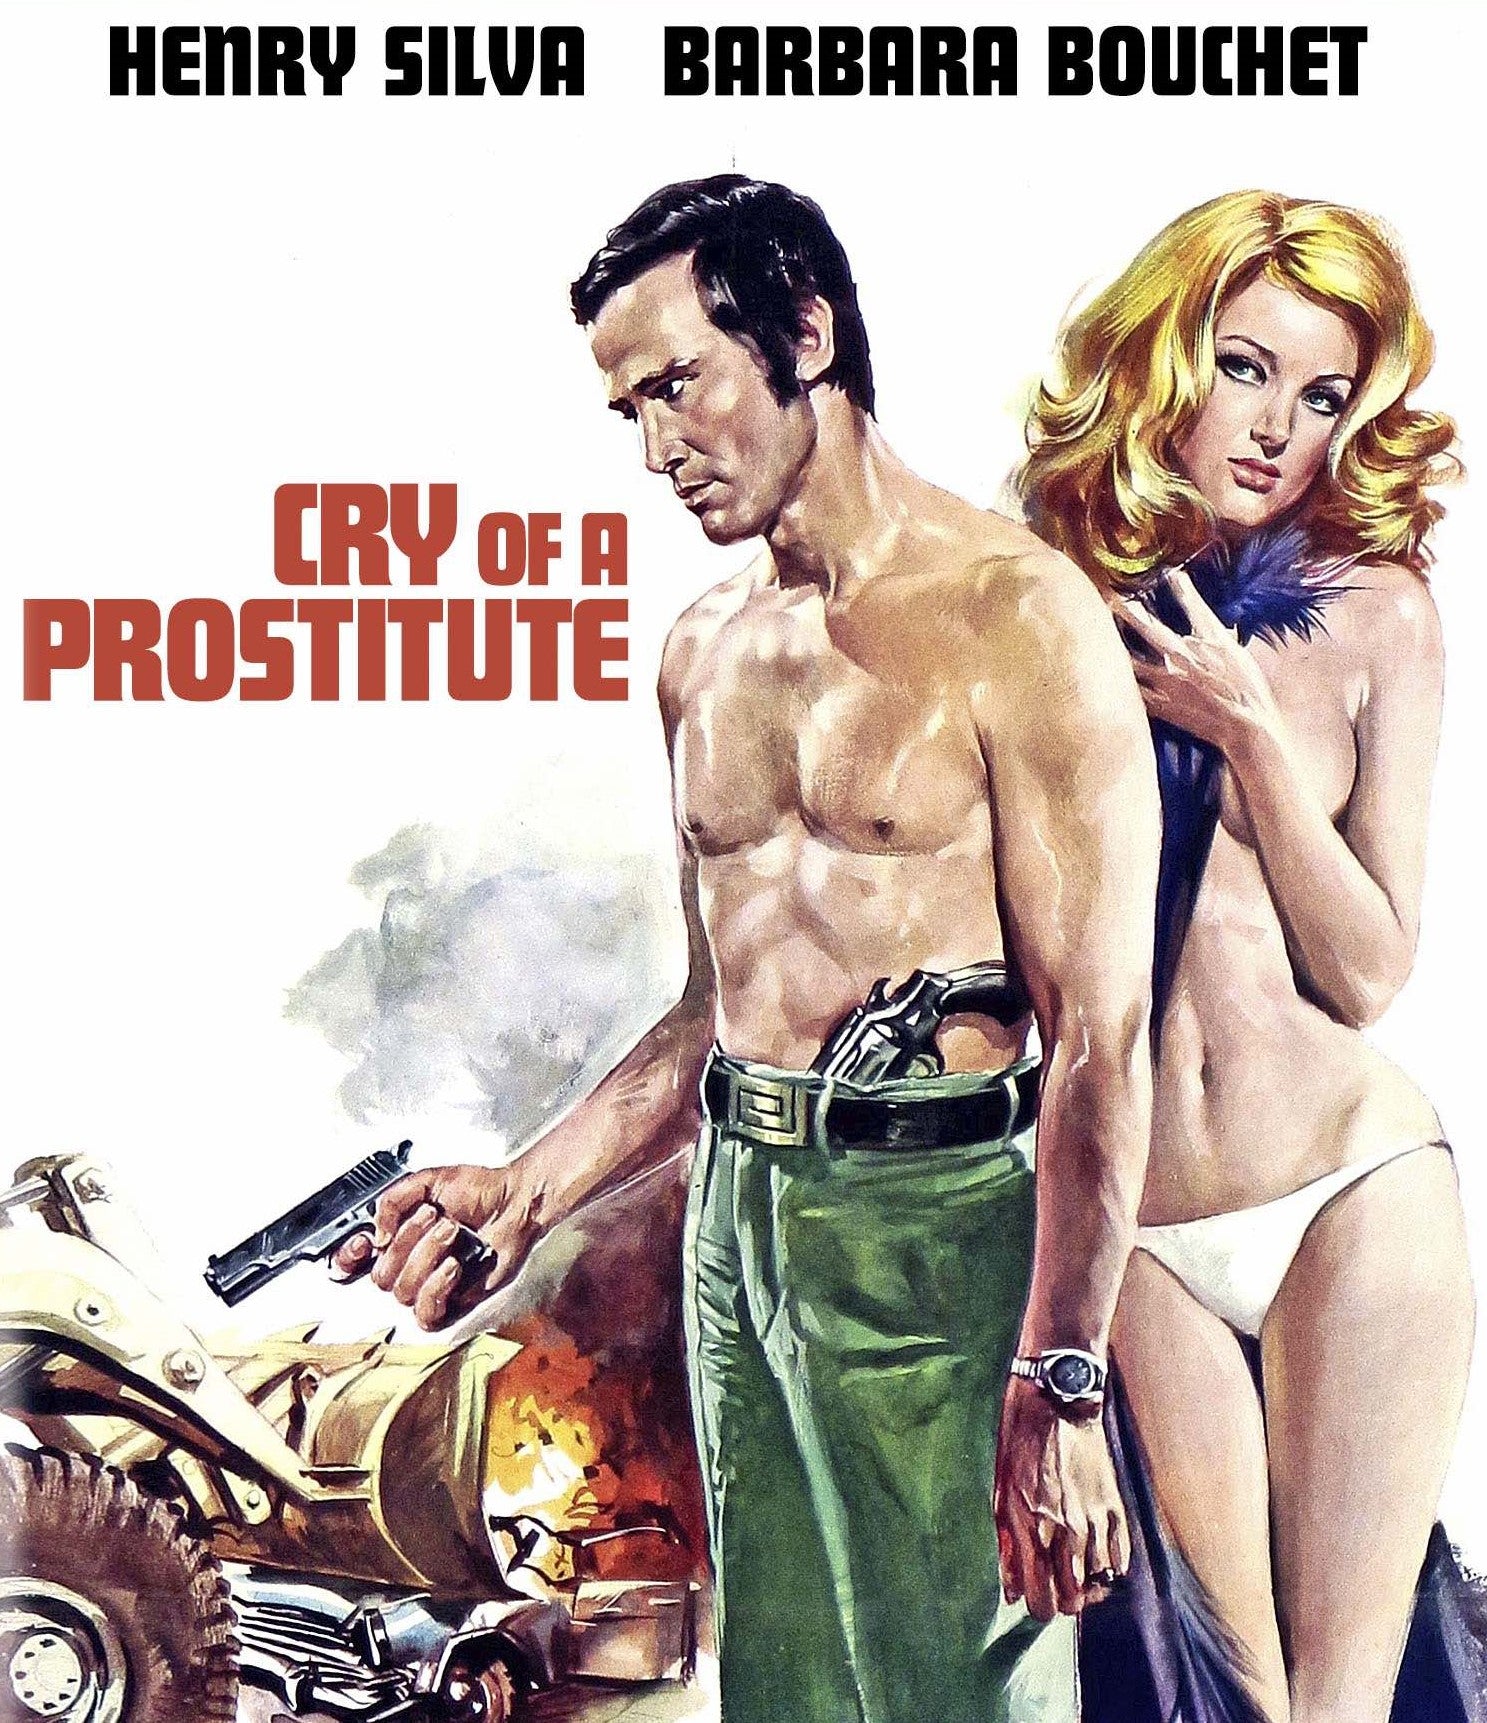 CRY OF A PROSTITUTE (RE-ISSUE) BLU-RAY